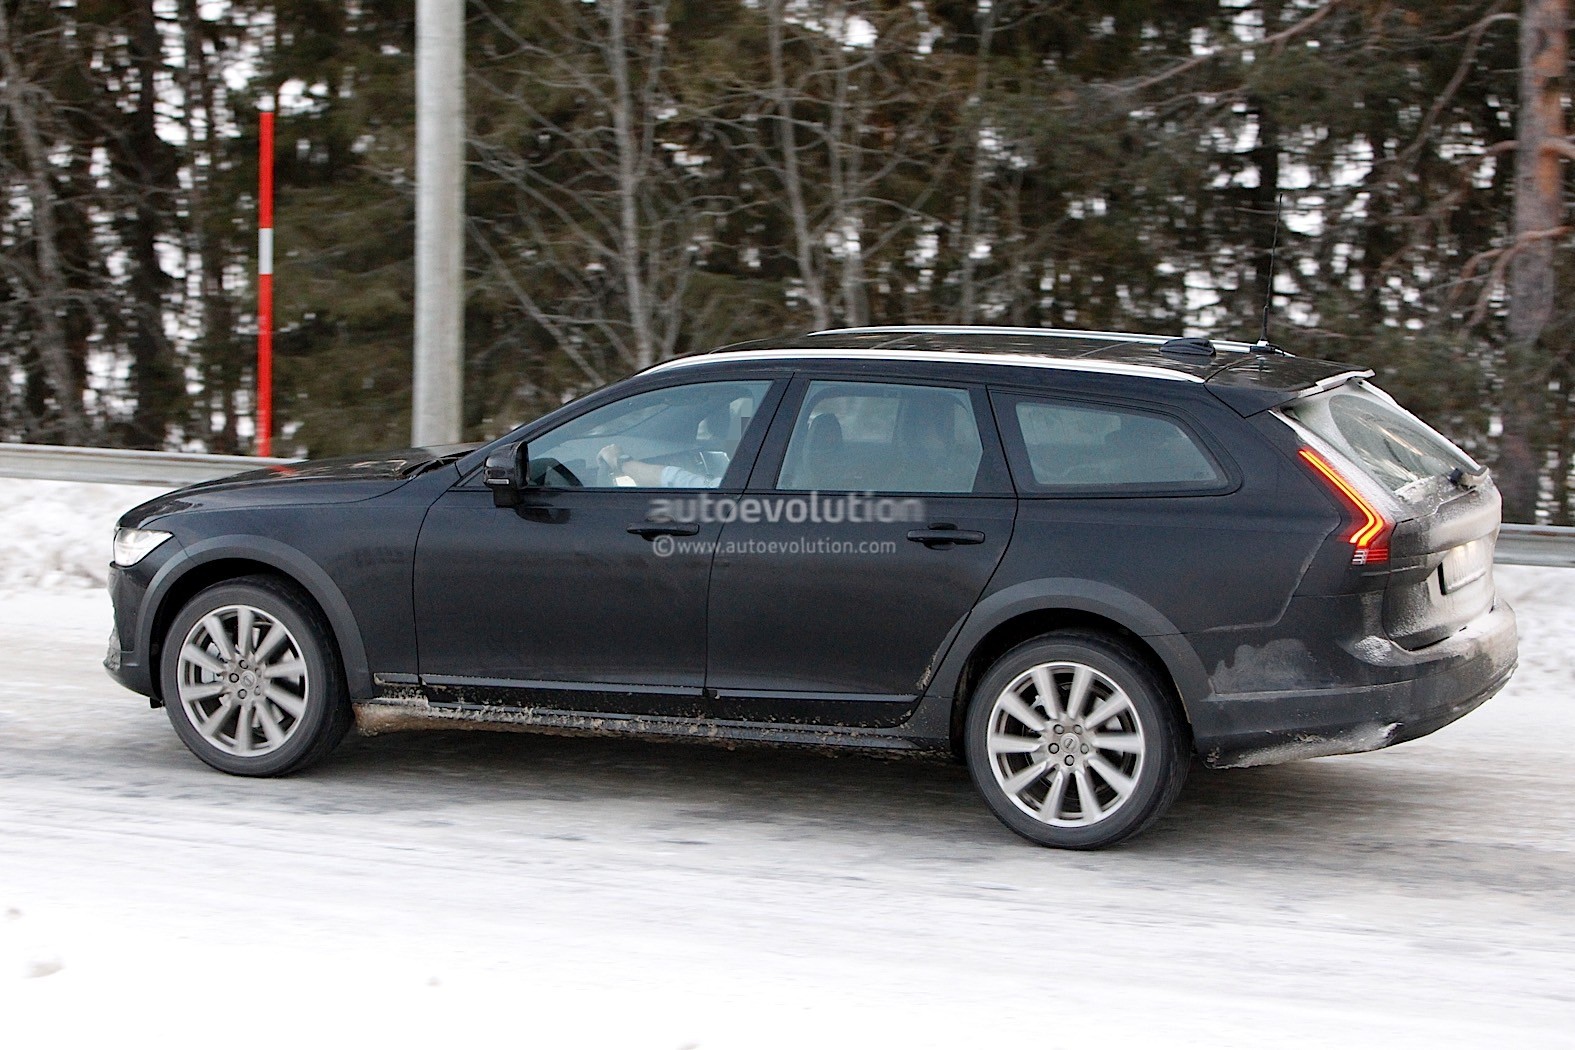 https://s1.cdn.autoevolution.com/images/news/gallery/2021-volvo-s90-and-v90-facelift-wear-useless-camouflage-winter-testing_3.jpg